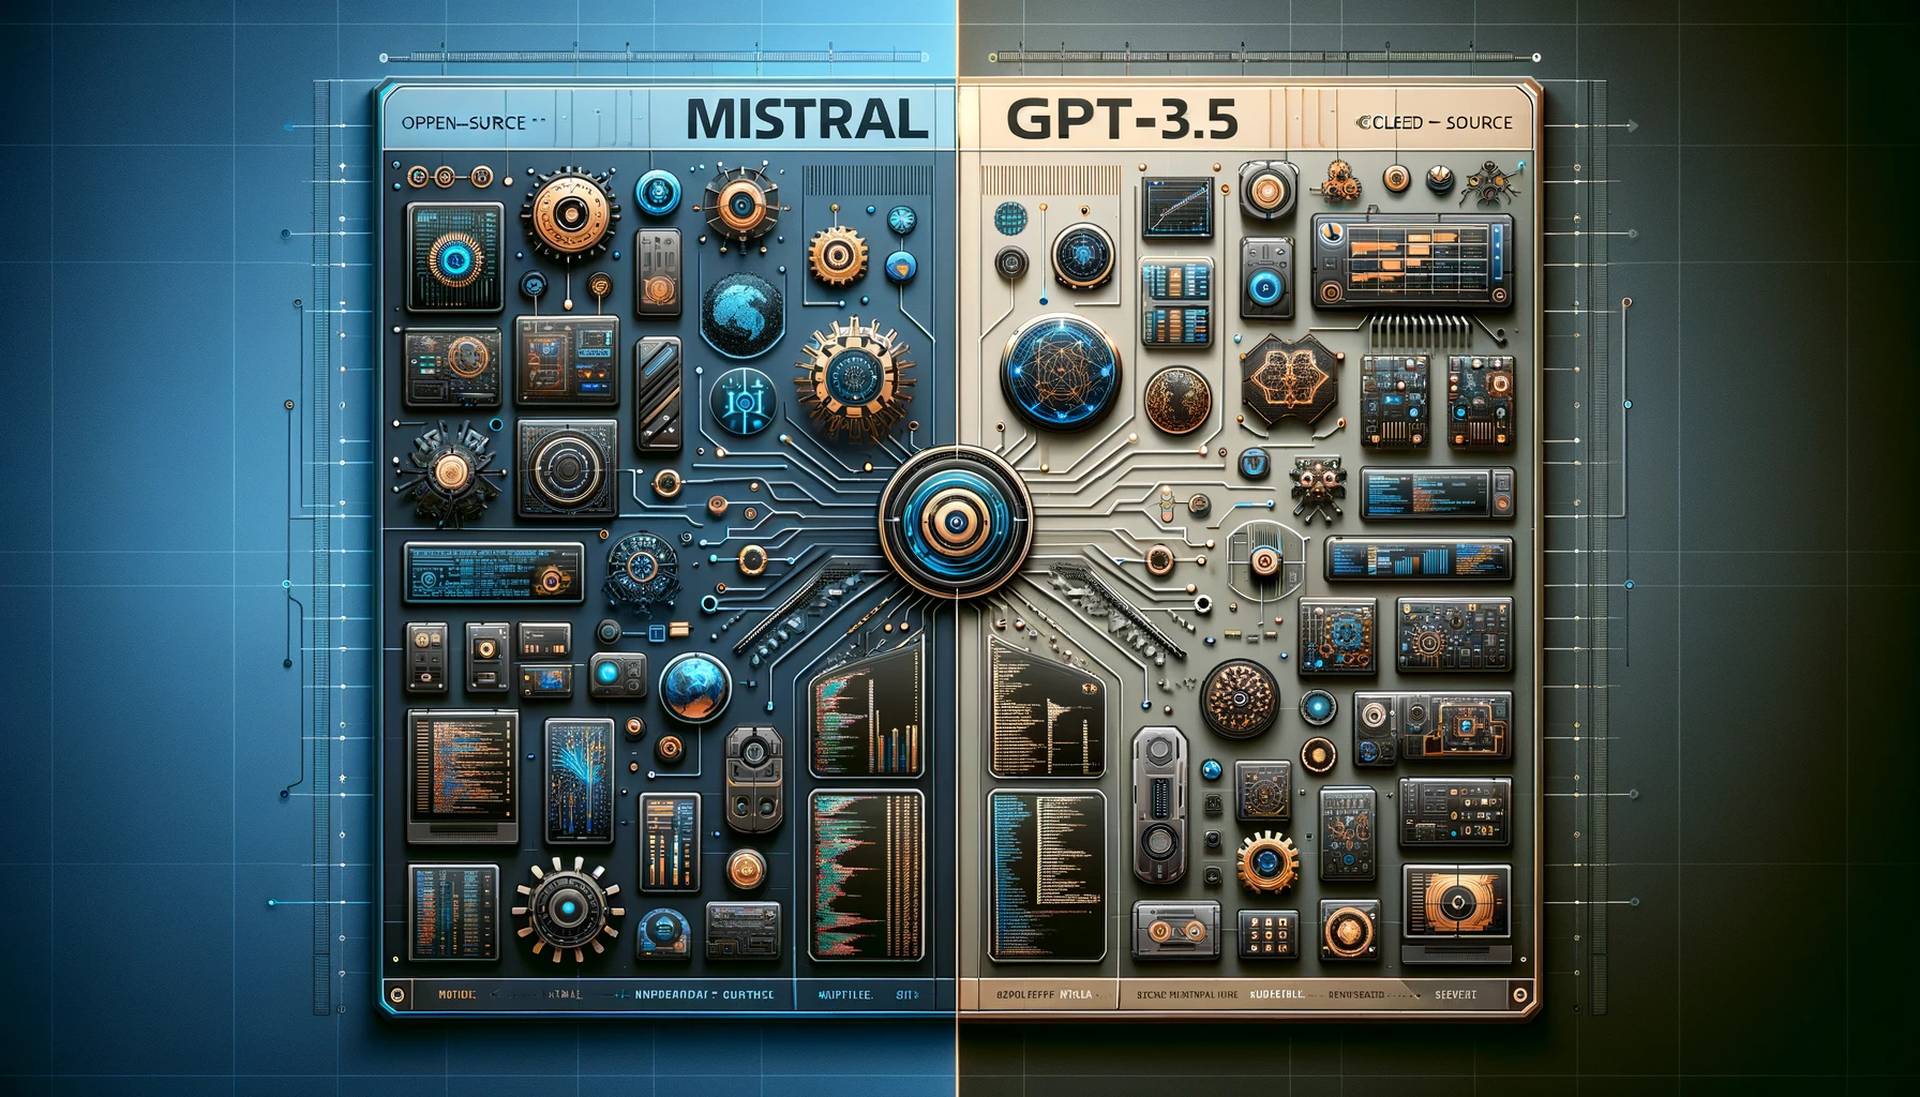 Comparison: Can Mistral 7B really beat GPT-3.5 Turbo?